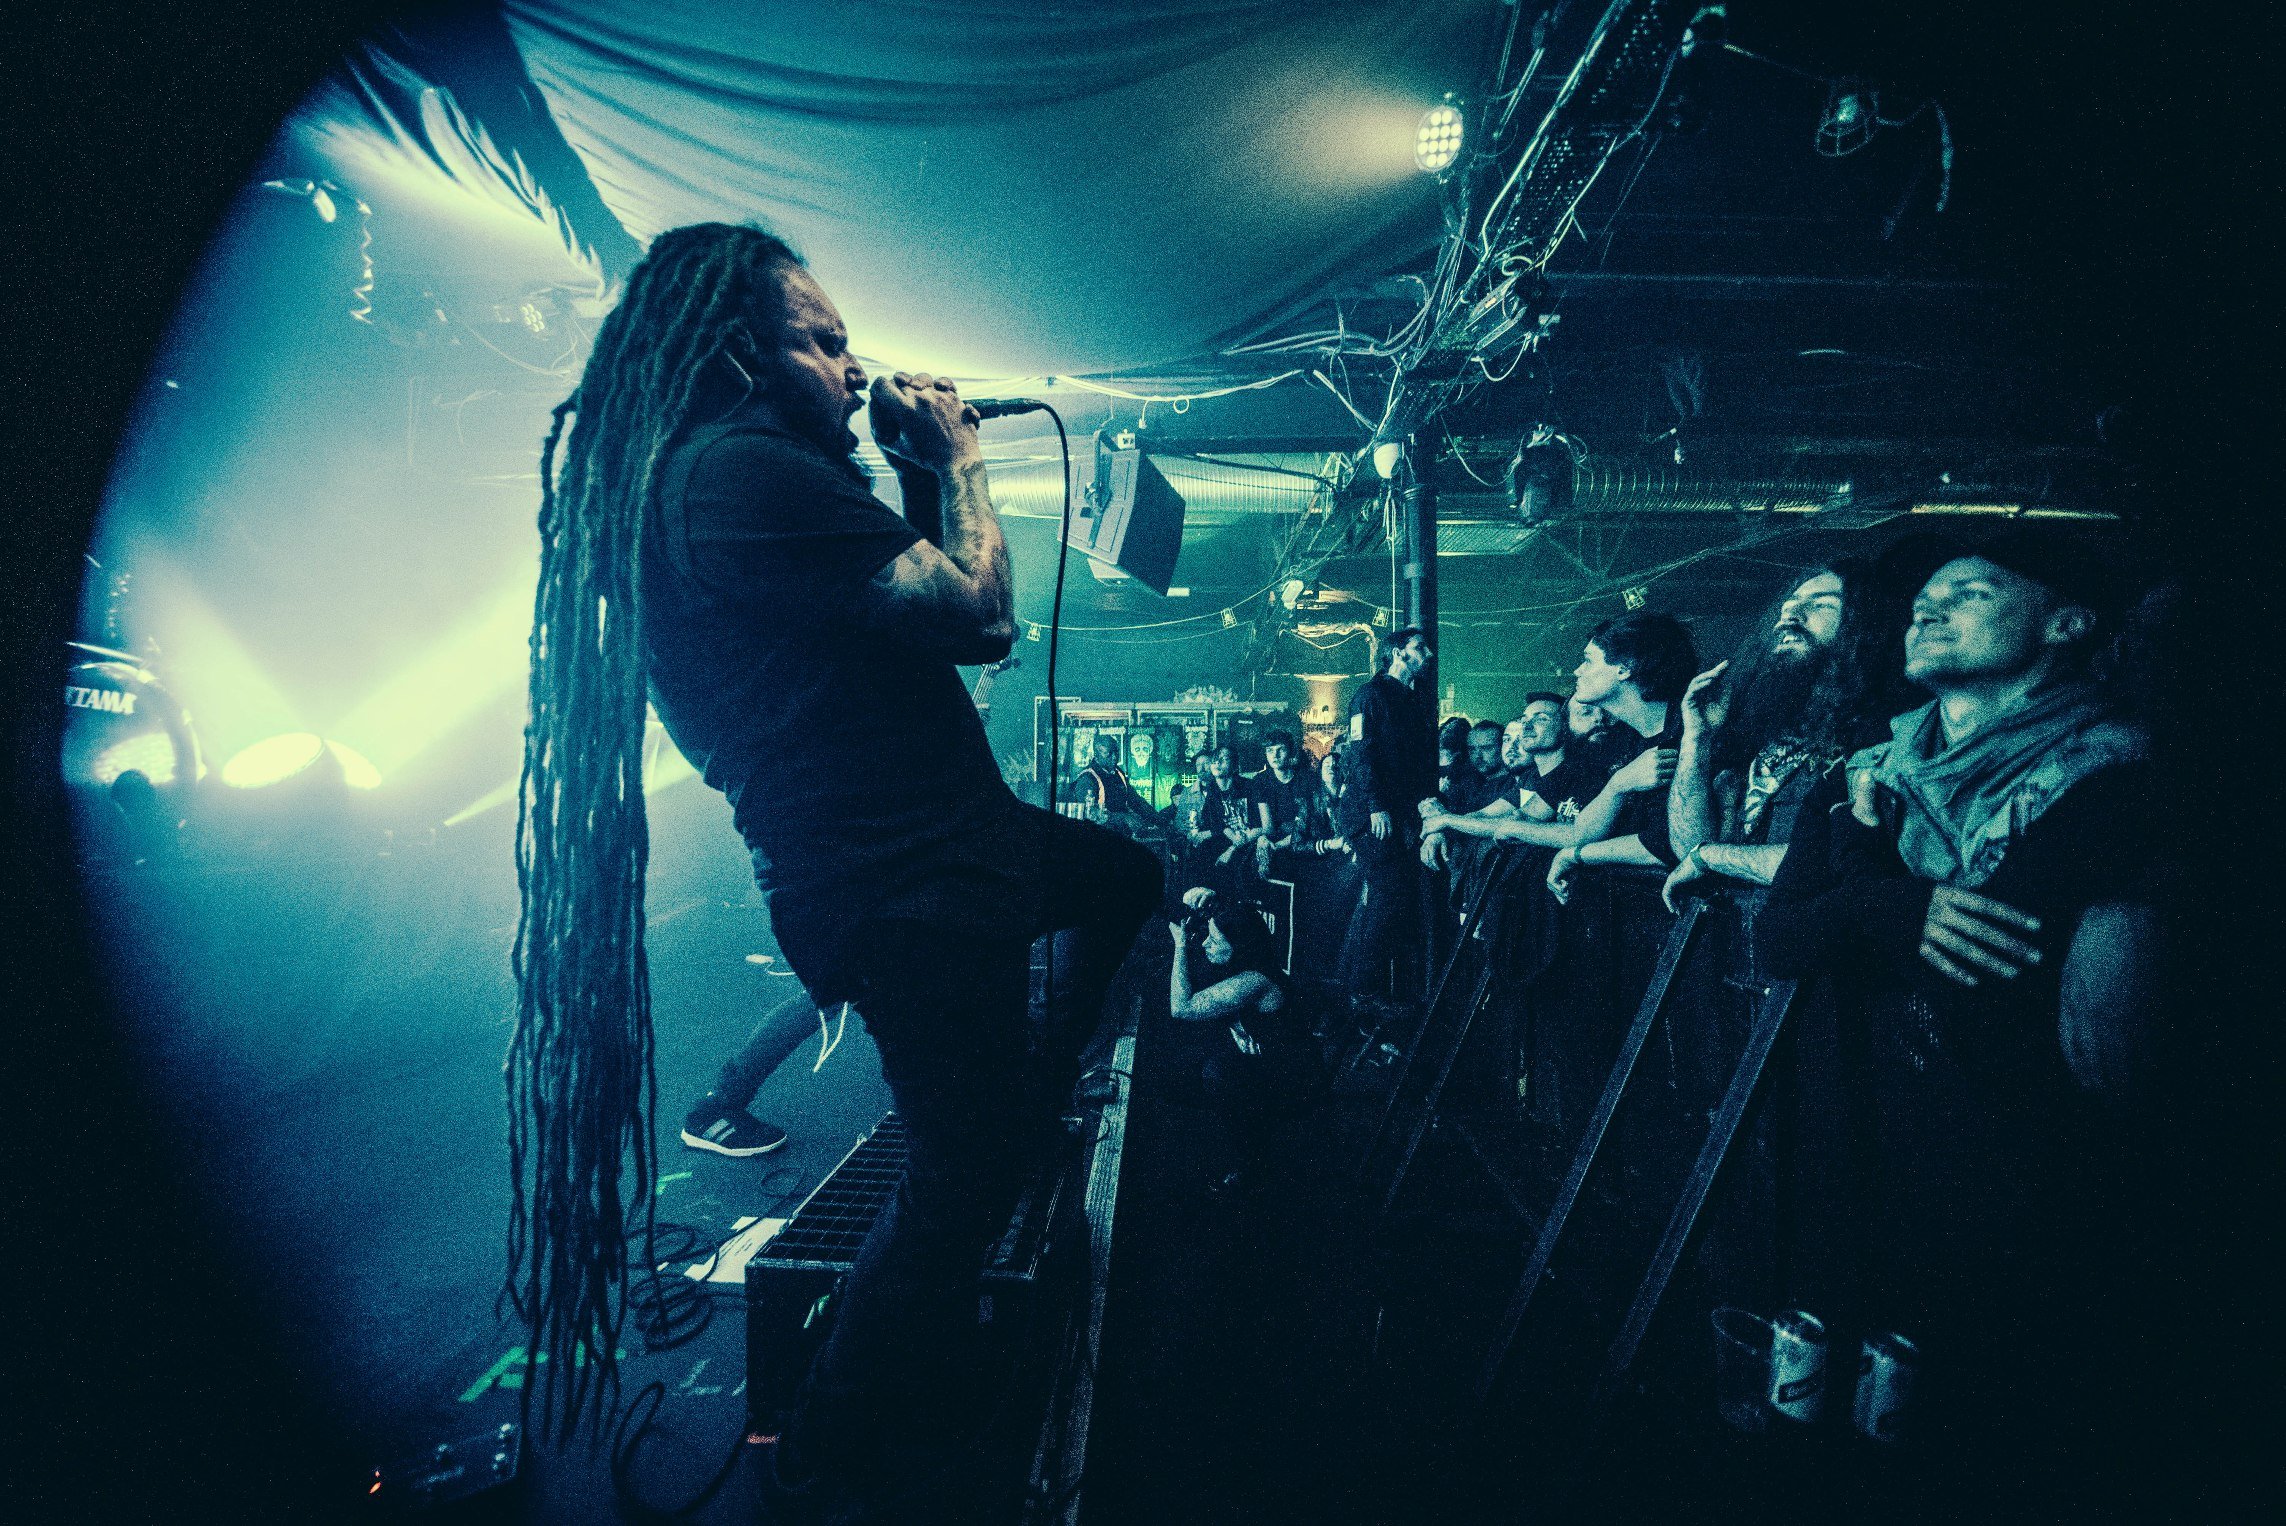 Decapitated at the Bread Shed in Manchester on April 1st 2022